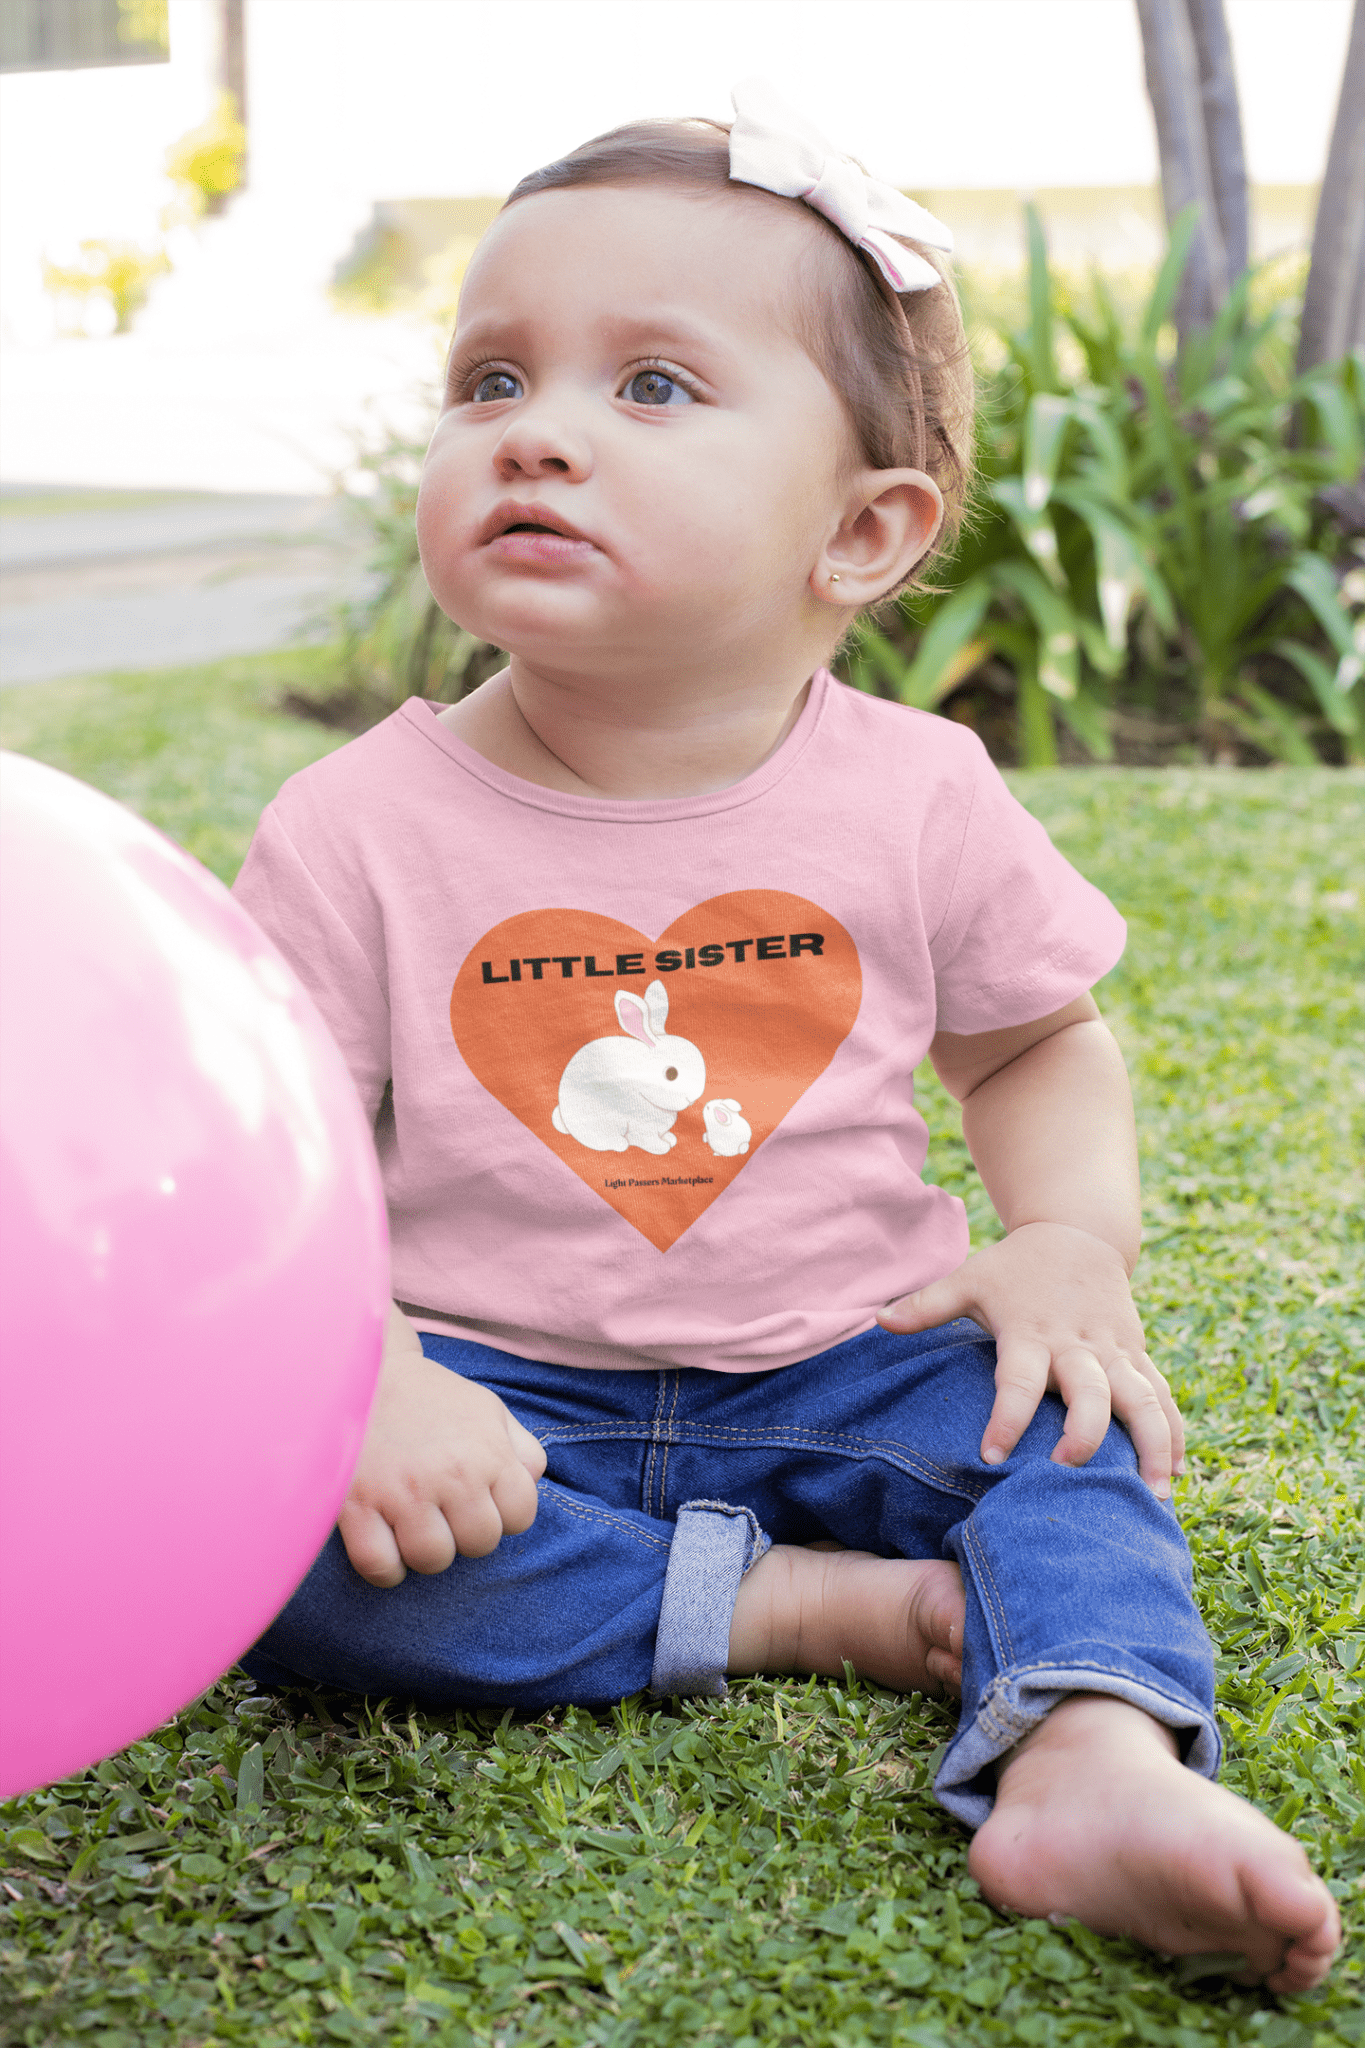 A baby sitting on grass with a balloon, wearing a Little Sister Baby T-shirt. Infant tee with side seams, ribbed knitting, and taped shoulders for comfort and durability.